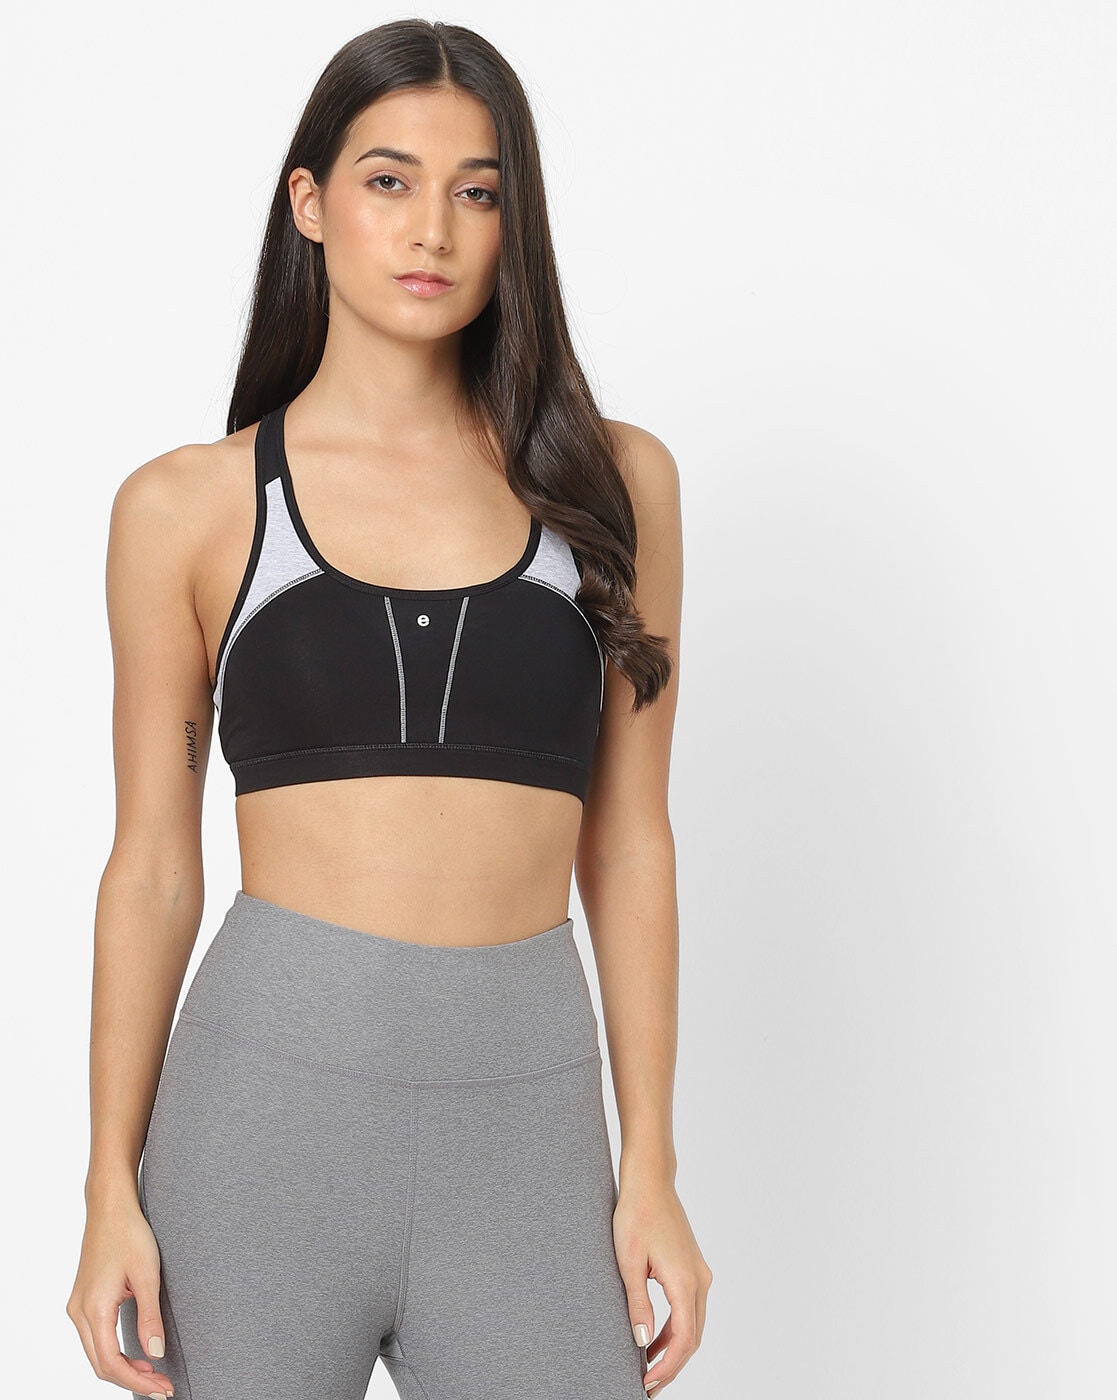 Colourblock Padded Sports Bra with Racer Back